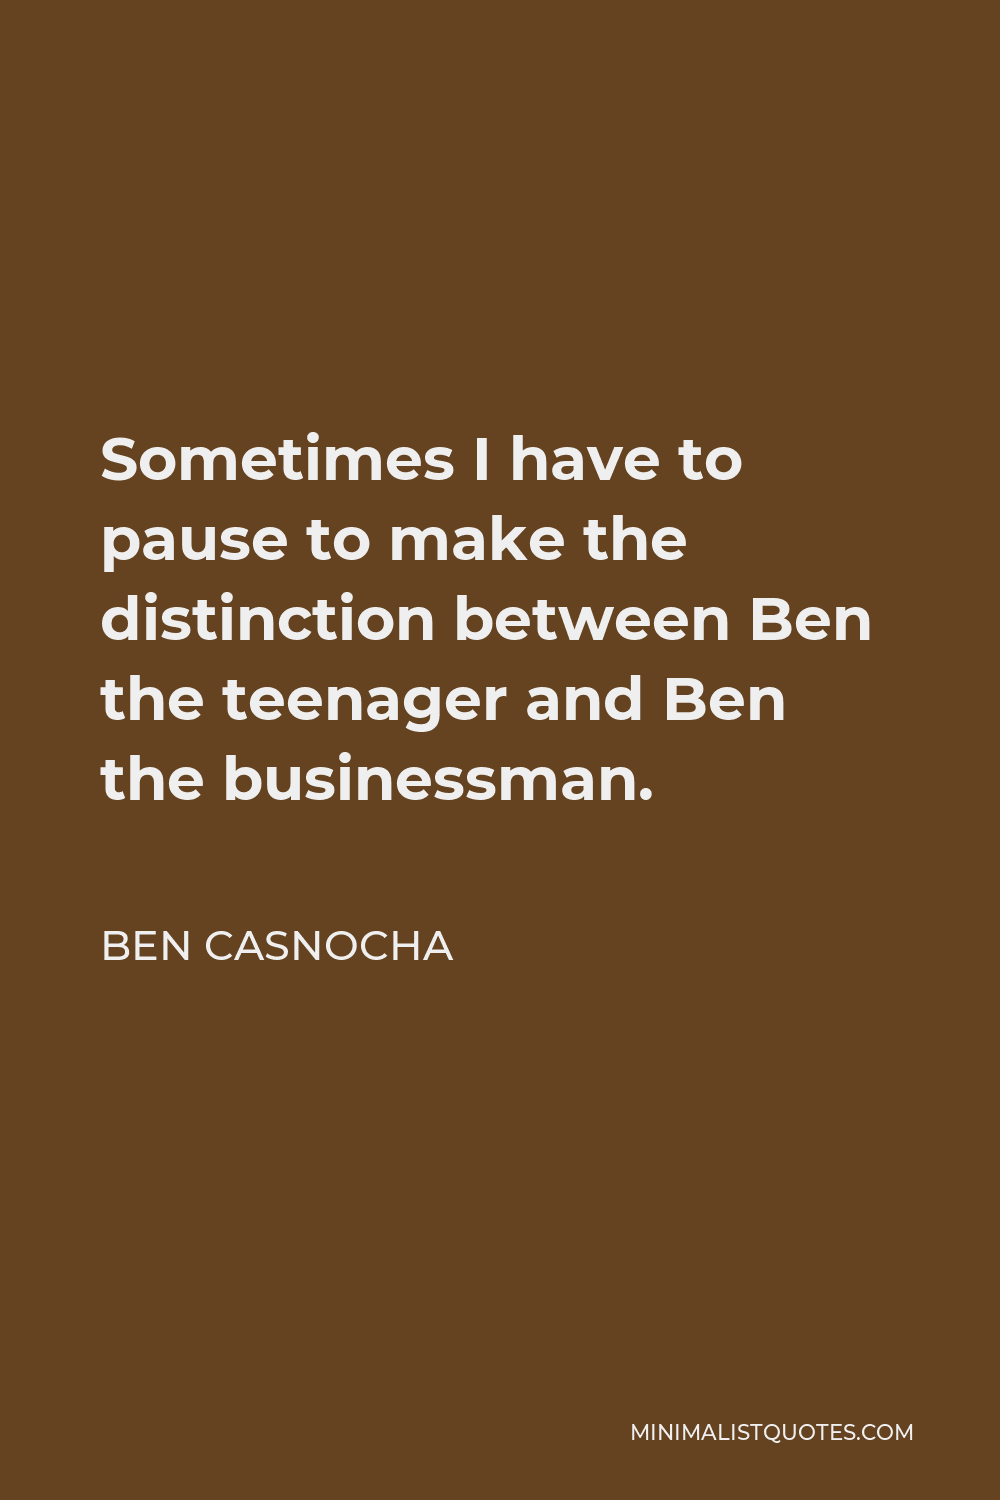 Ben Casnocha Quote - Sometimes I have to pause to make the distinction between Ben the teenager and Ben the businessman.